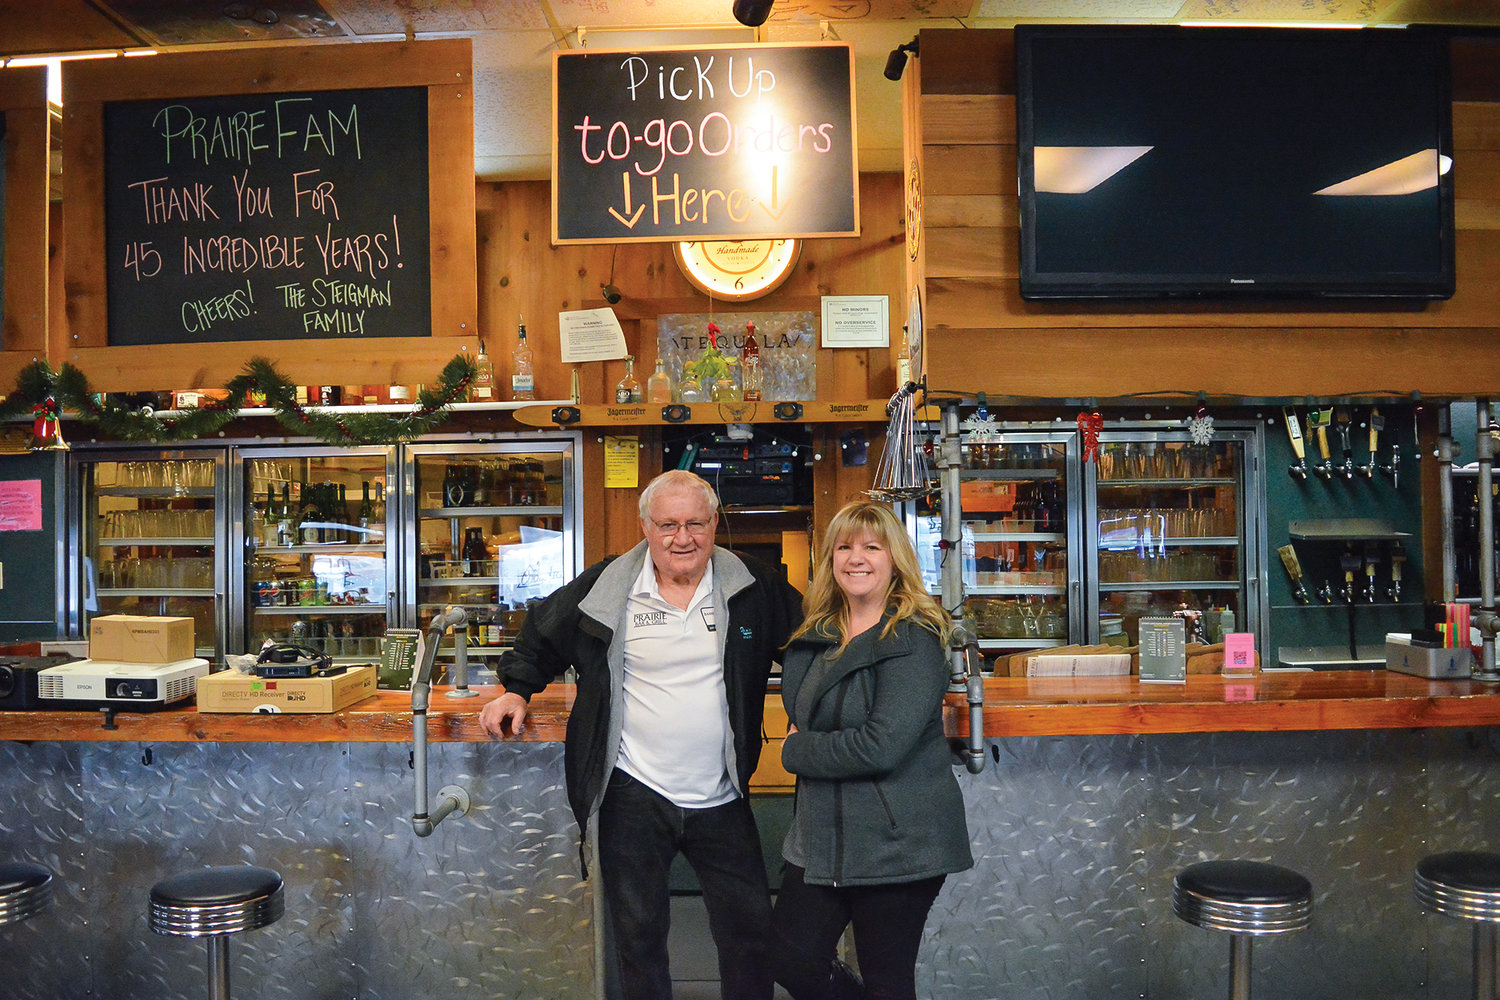 Ron Steigman, Prairie Bar and Grill’s former owner, and Shawna Risner, the new owner, are pictured.